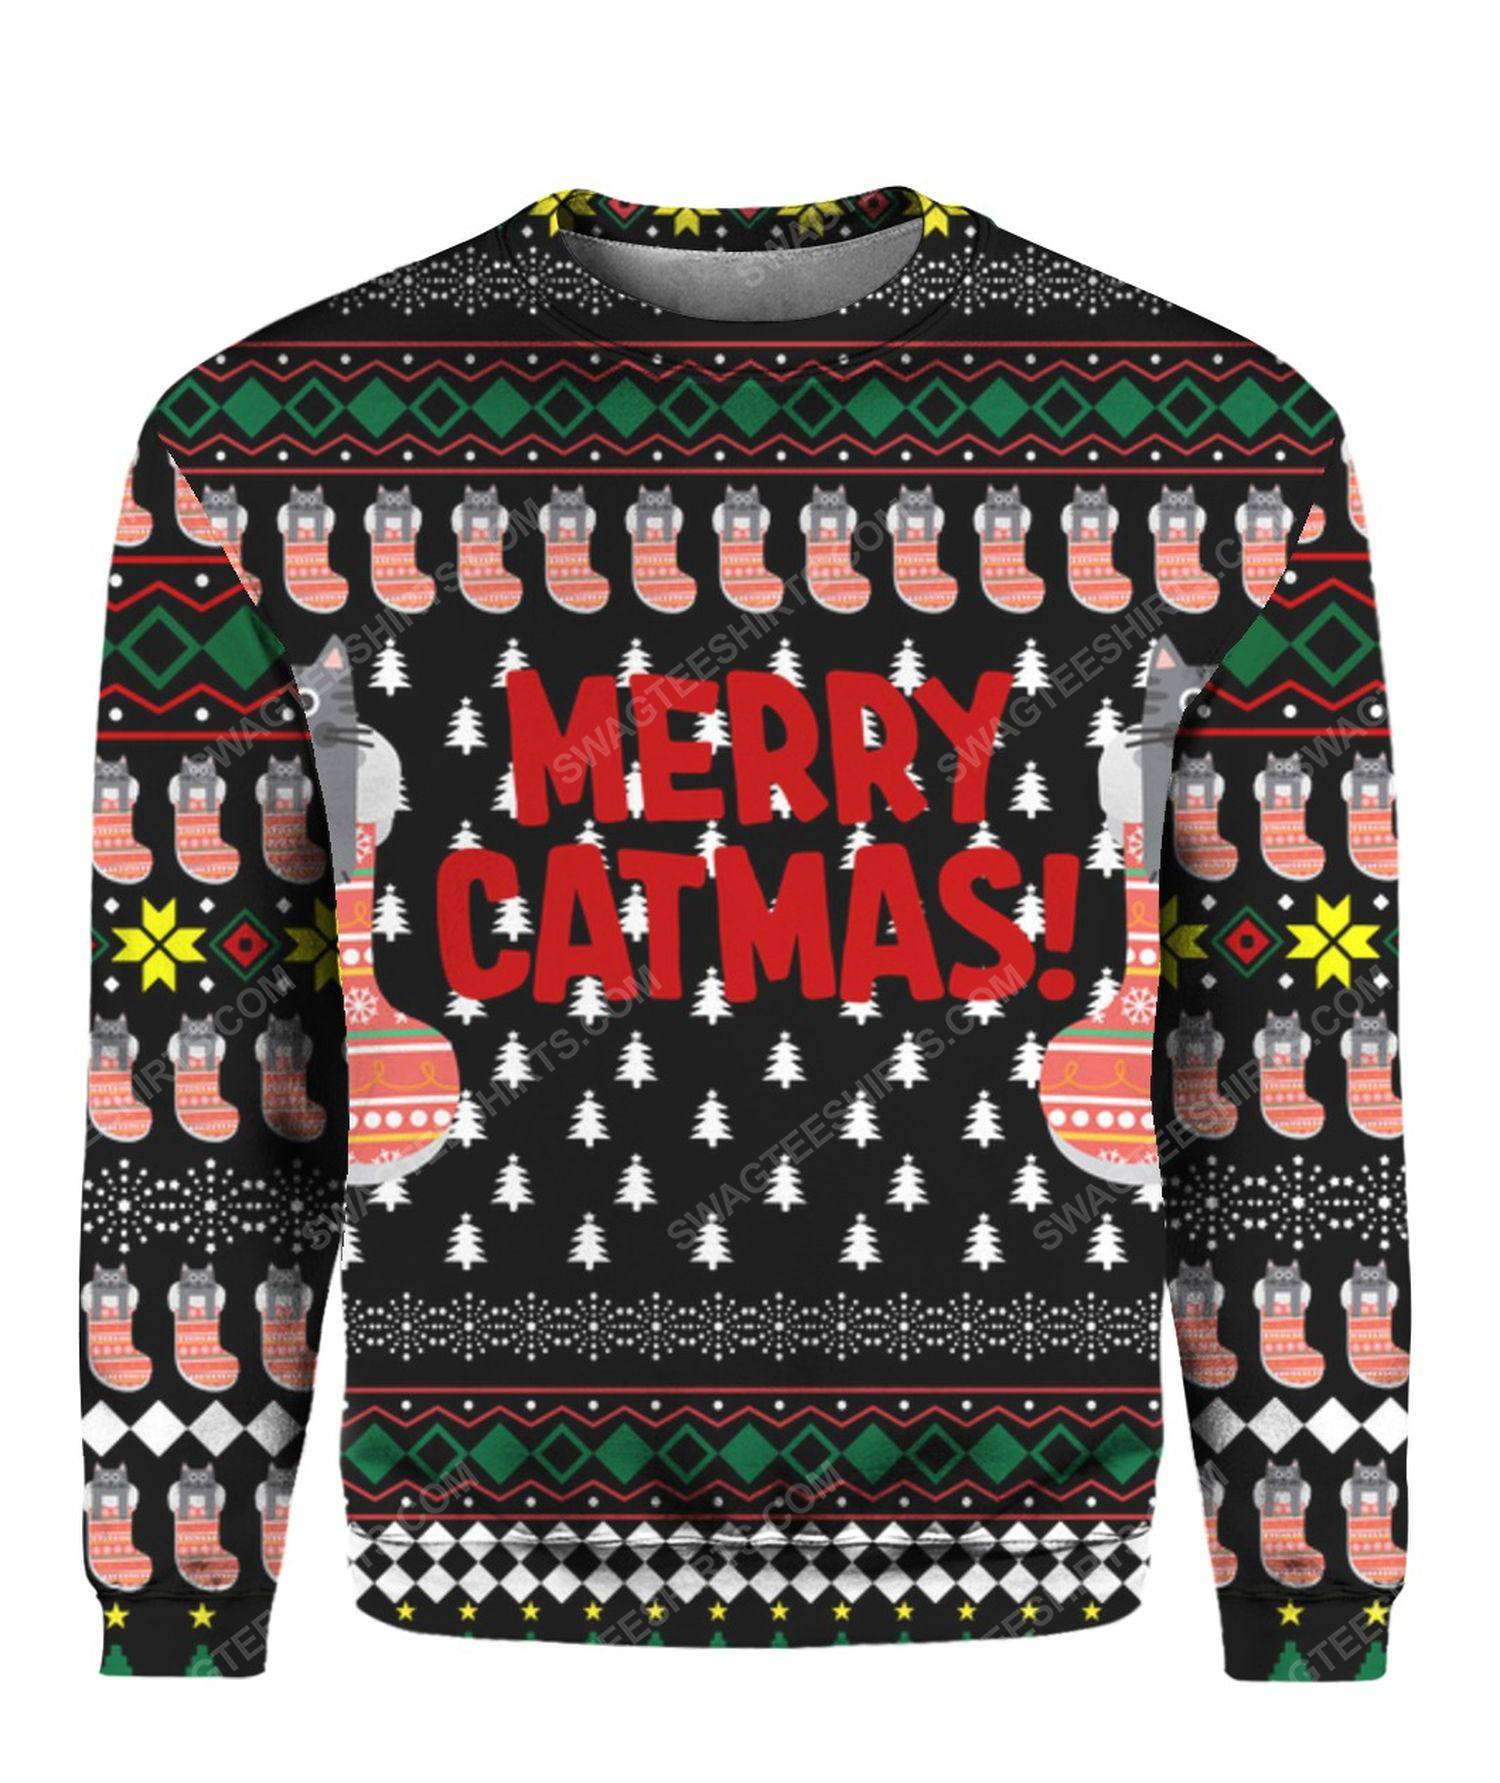 Merry catmas all over print ugly christmas sweater